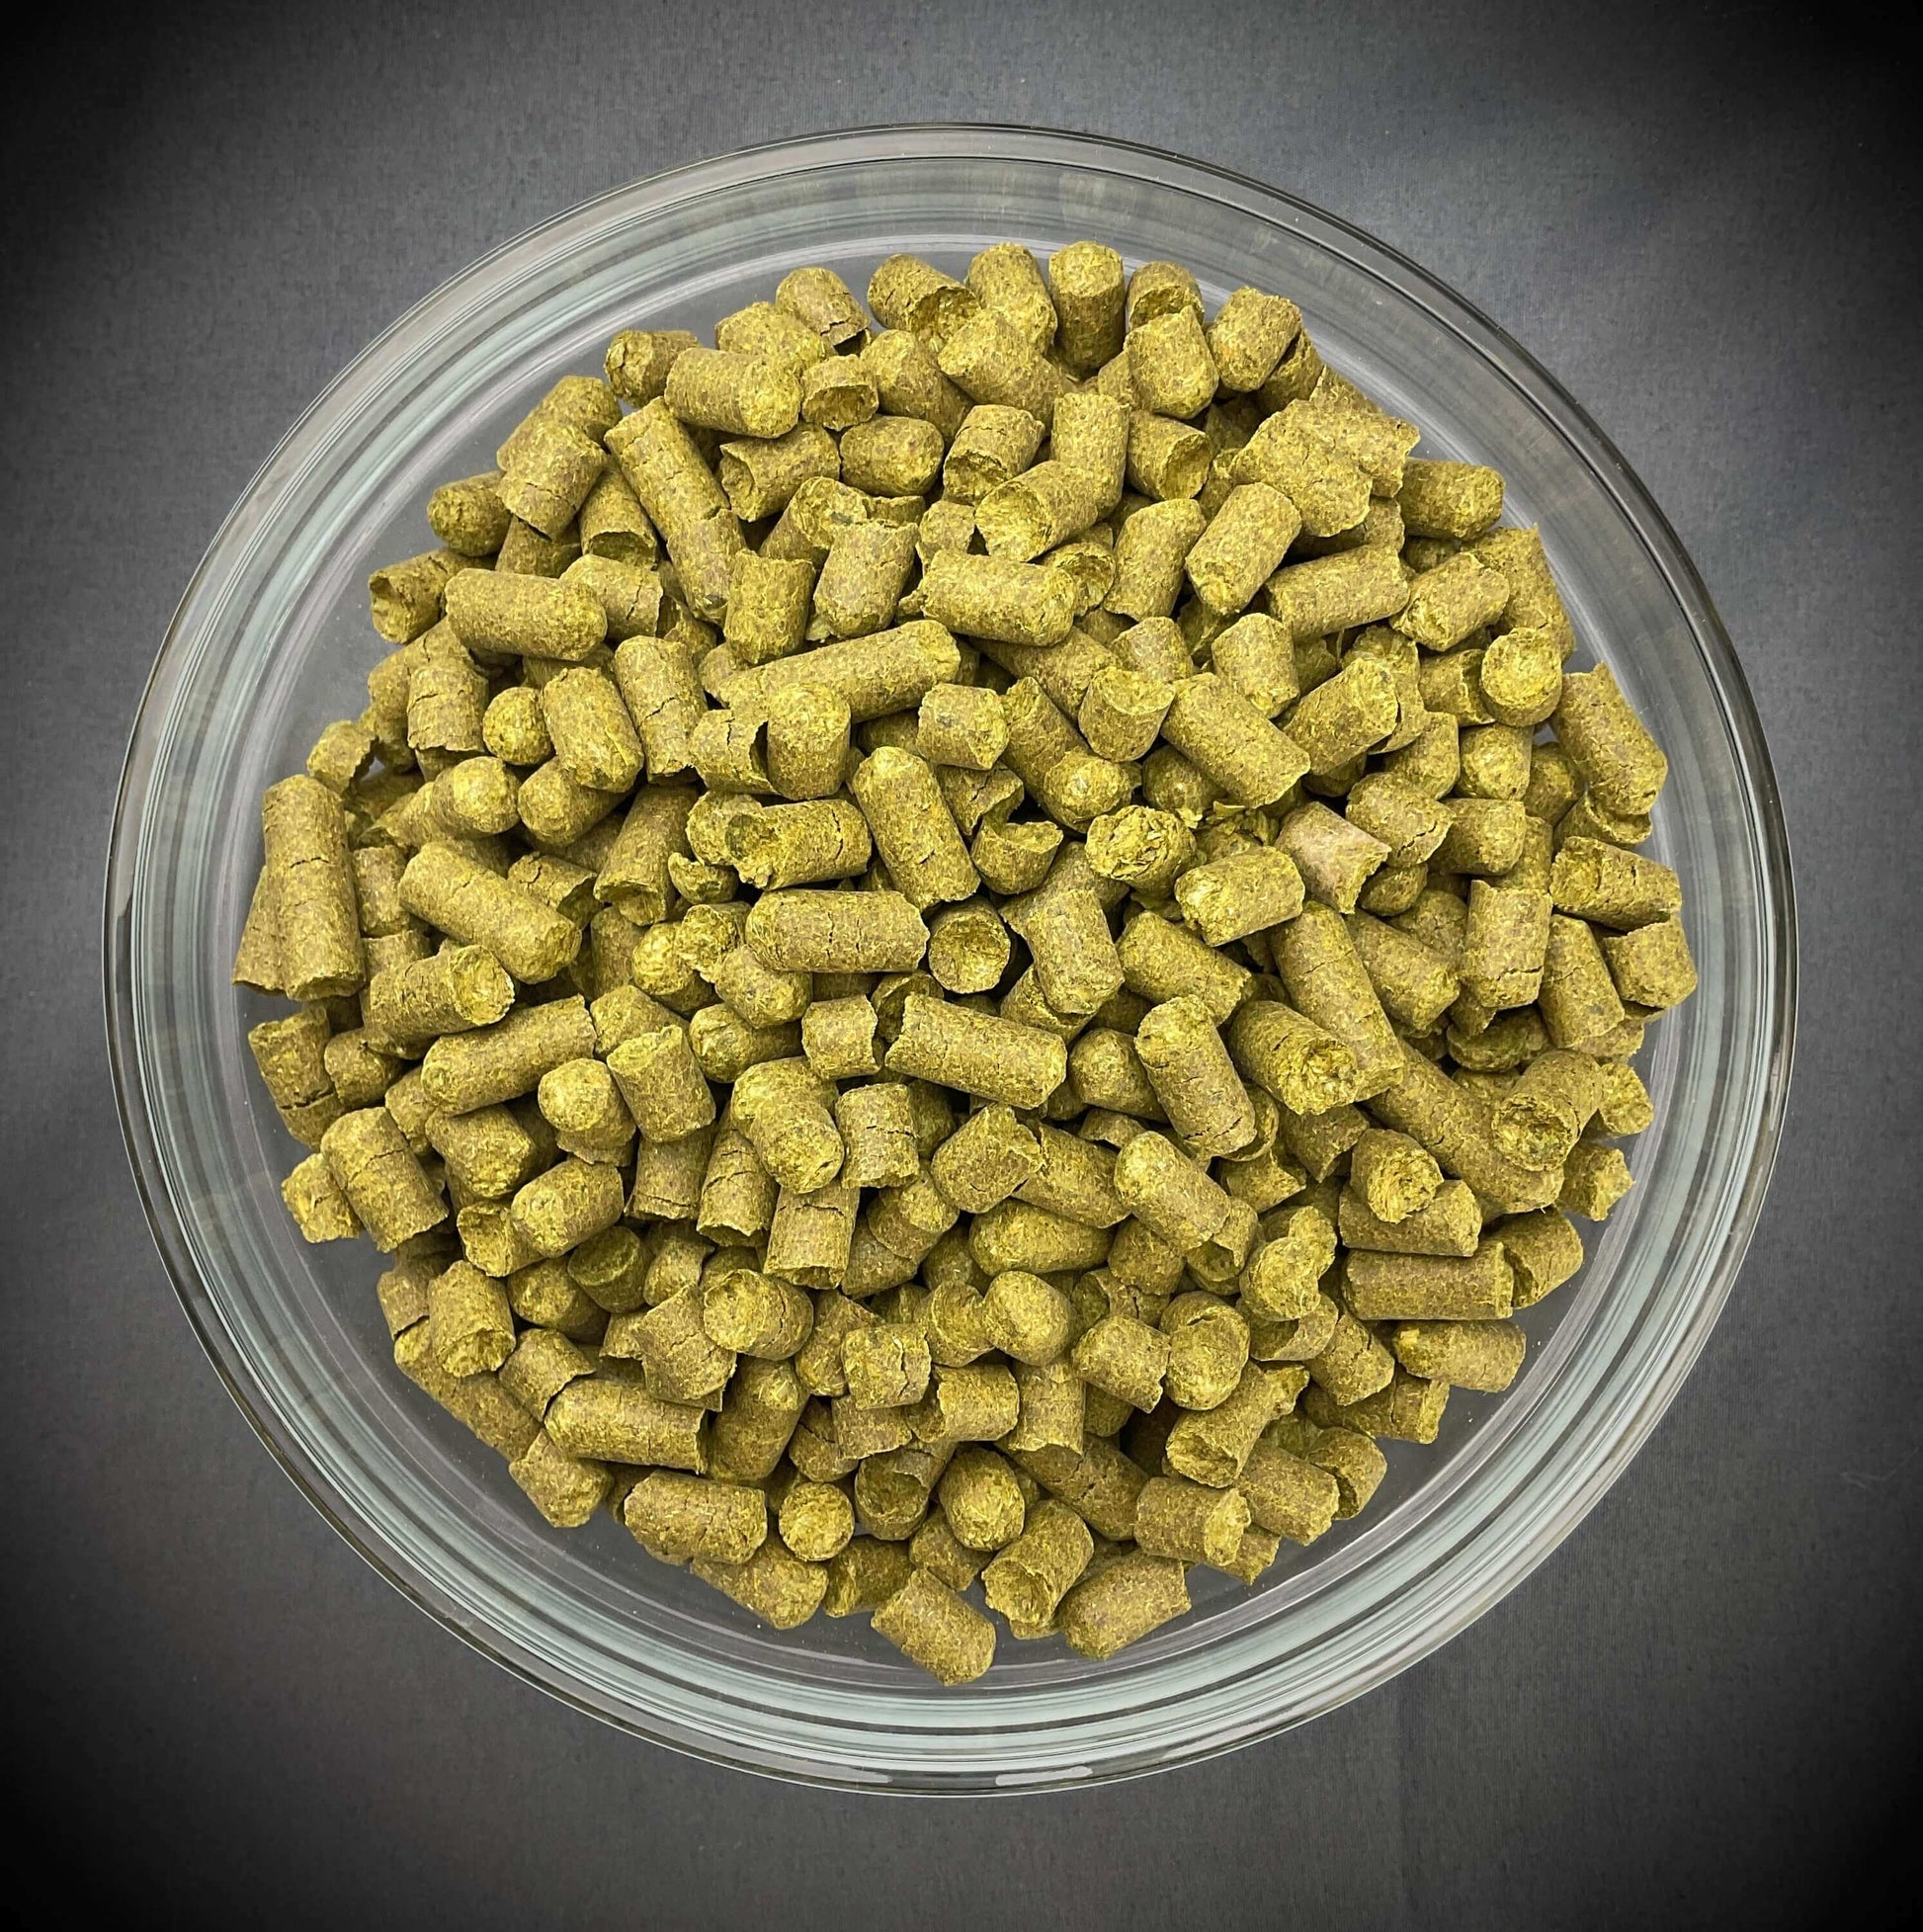 A bowl of Altus Hops Pellets Hops, showcasing their form, perfect for brewing.